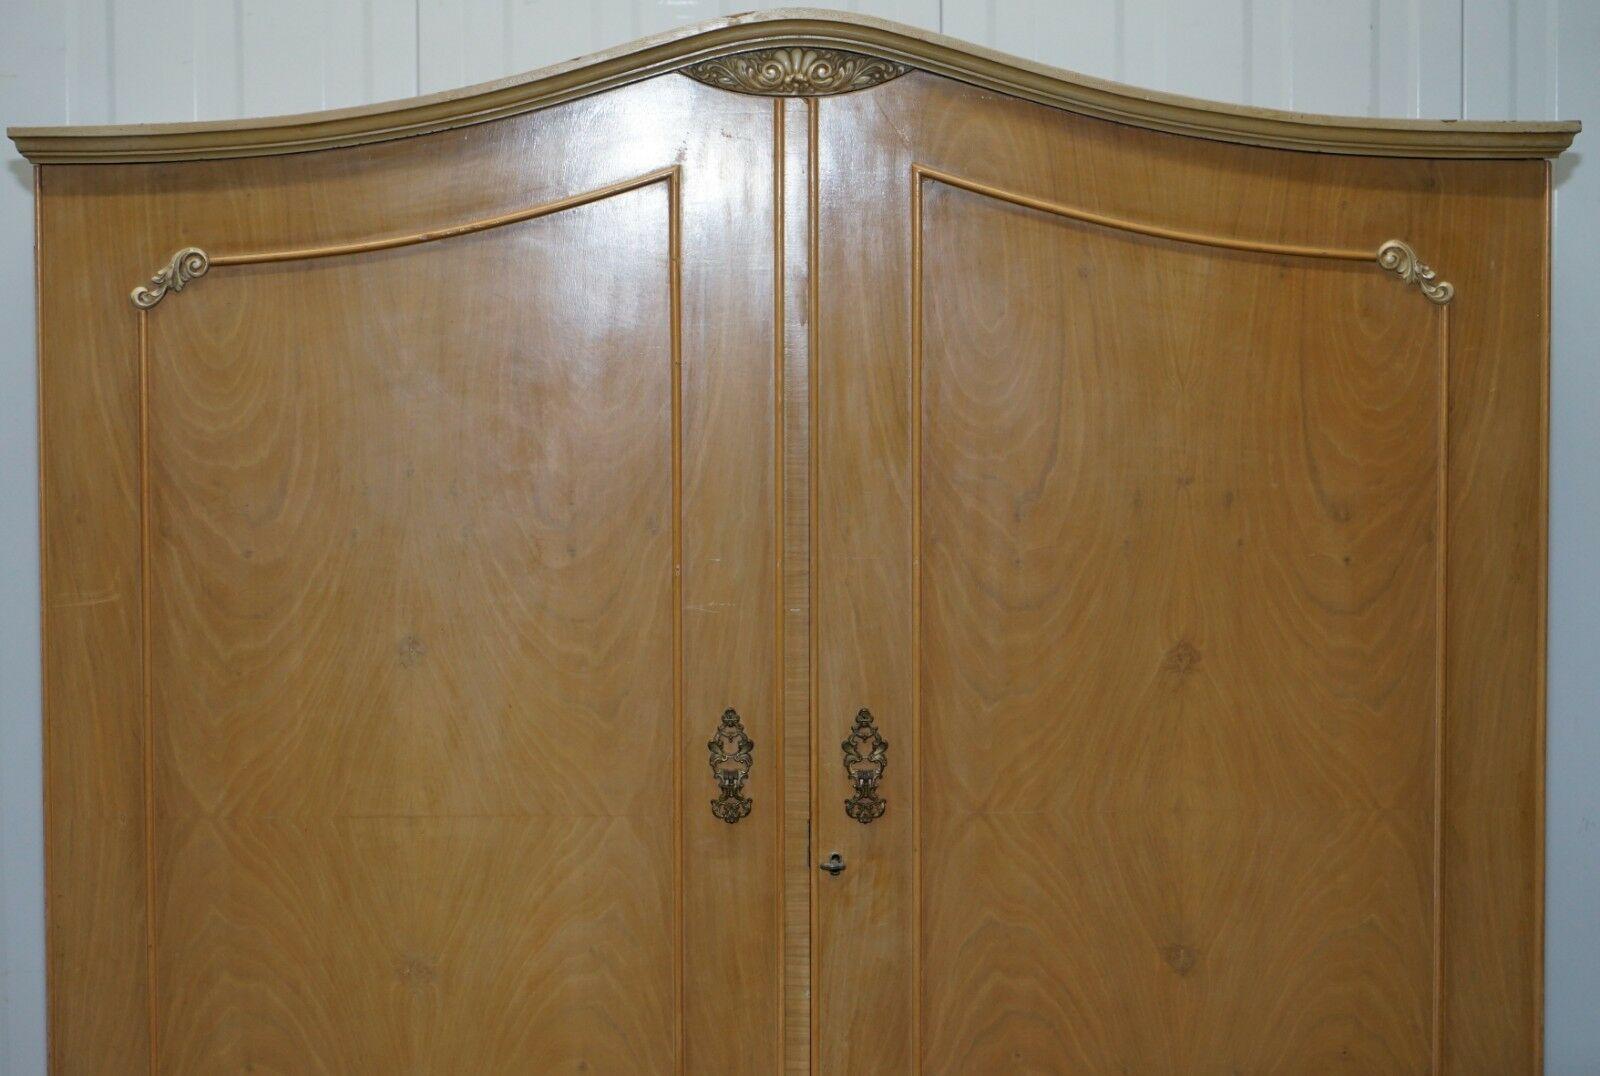 We are delighted to offer for sale this stunning Edwardian walnut cabinet Works London Satin Walnut double bank wardrobe

A very good looking and grand functional piece of furniture, the wardrobe can be split into two pieces for ease of transport.